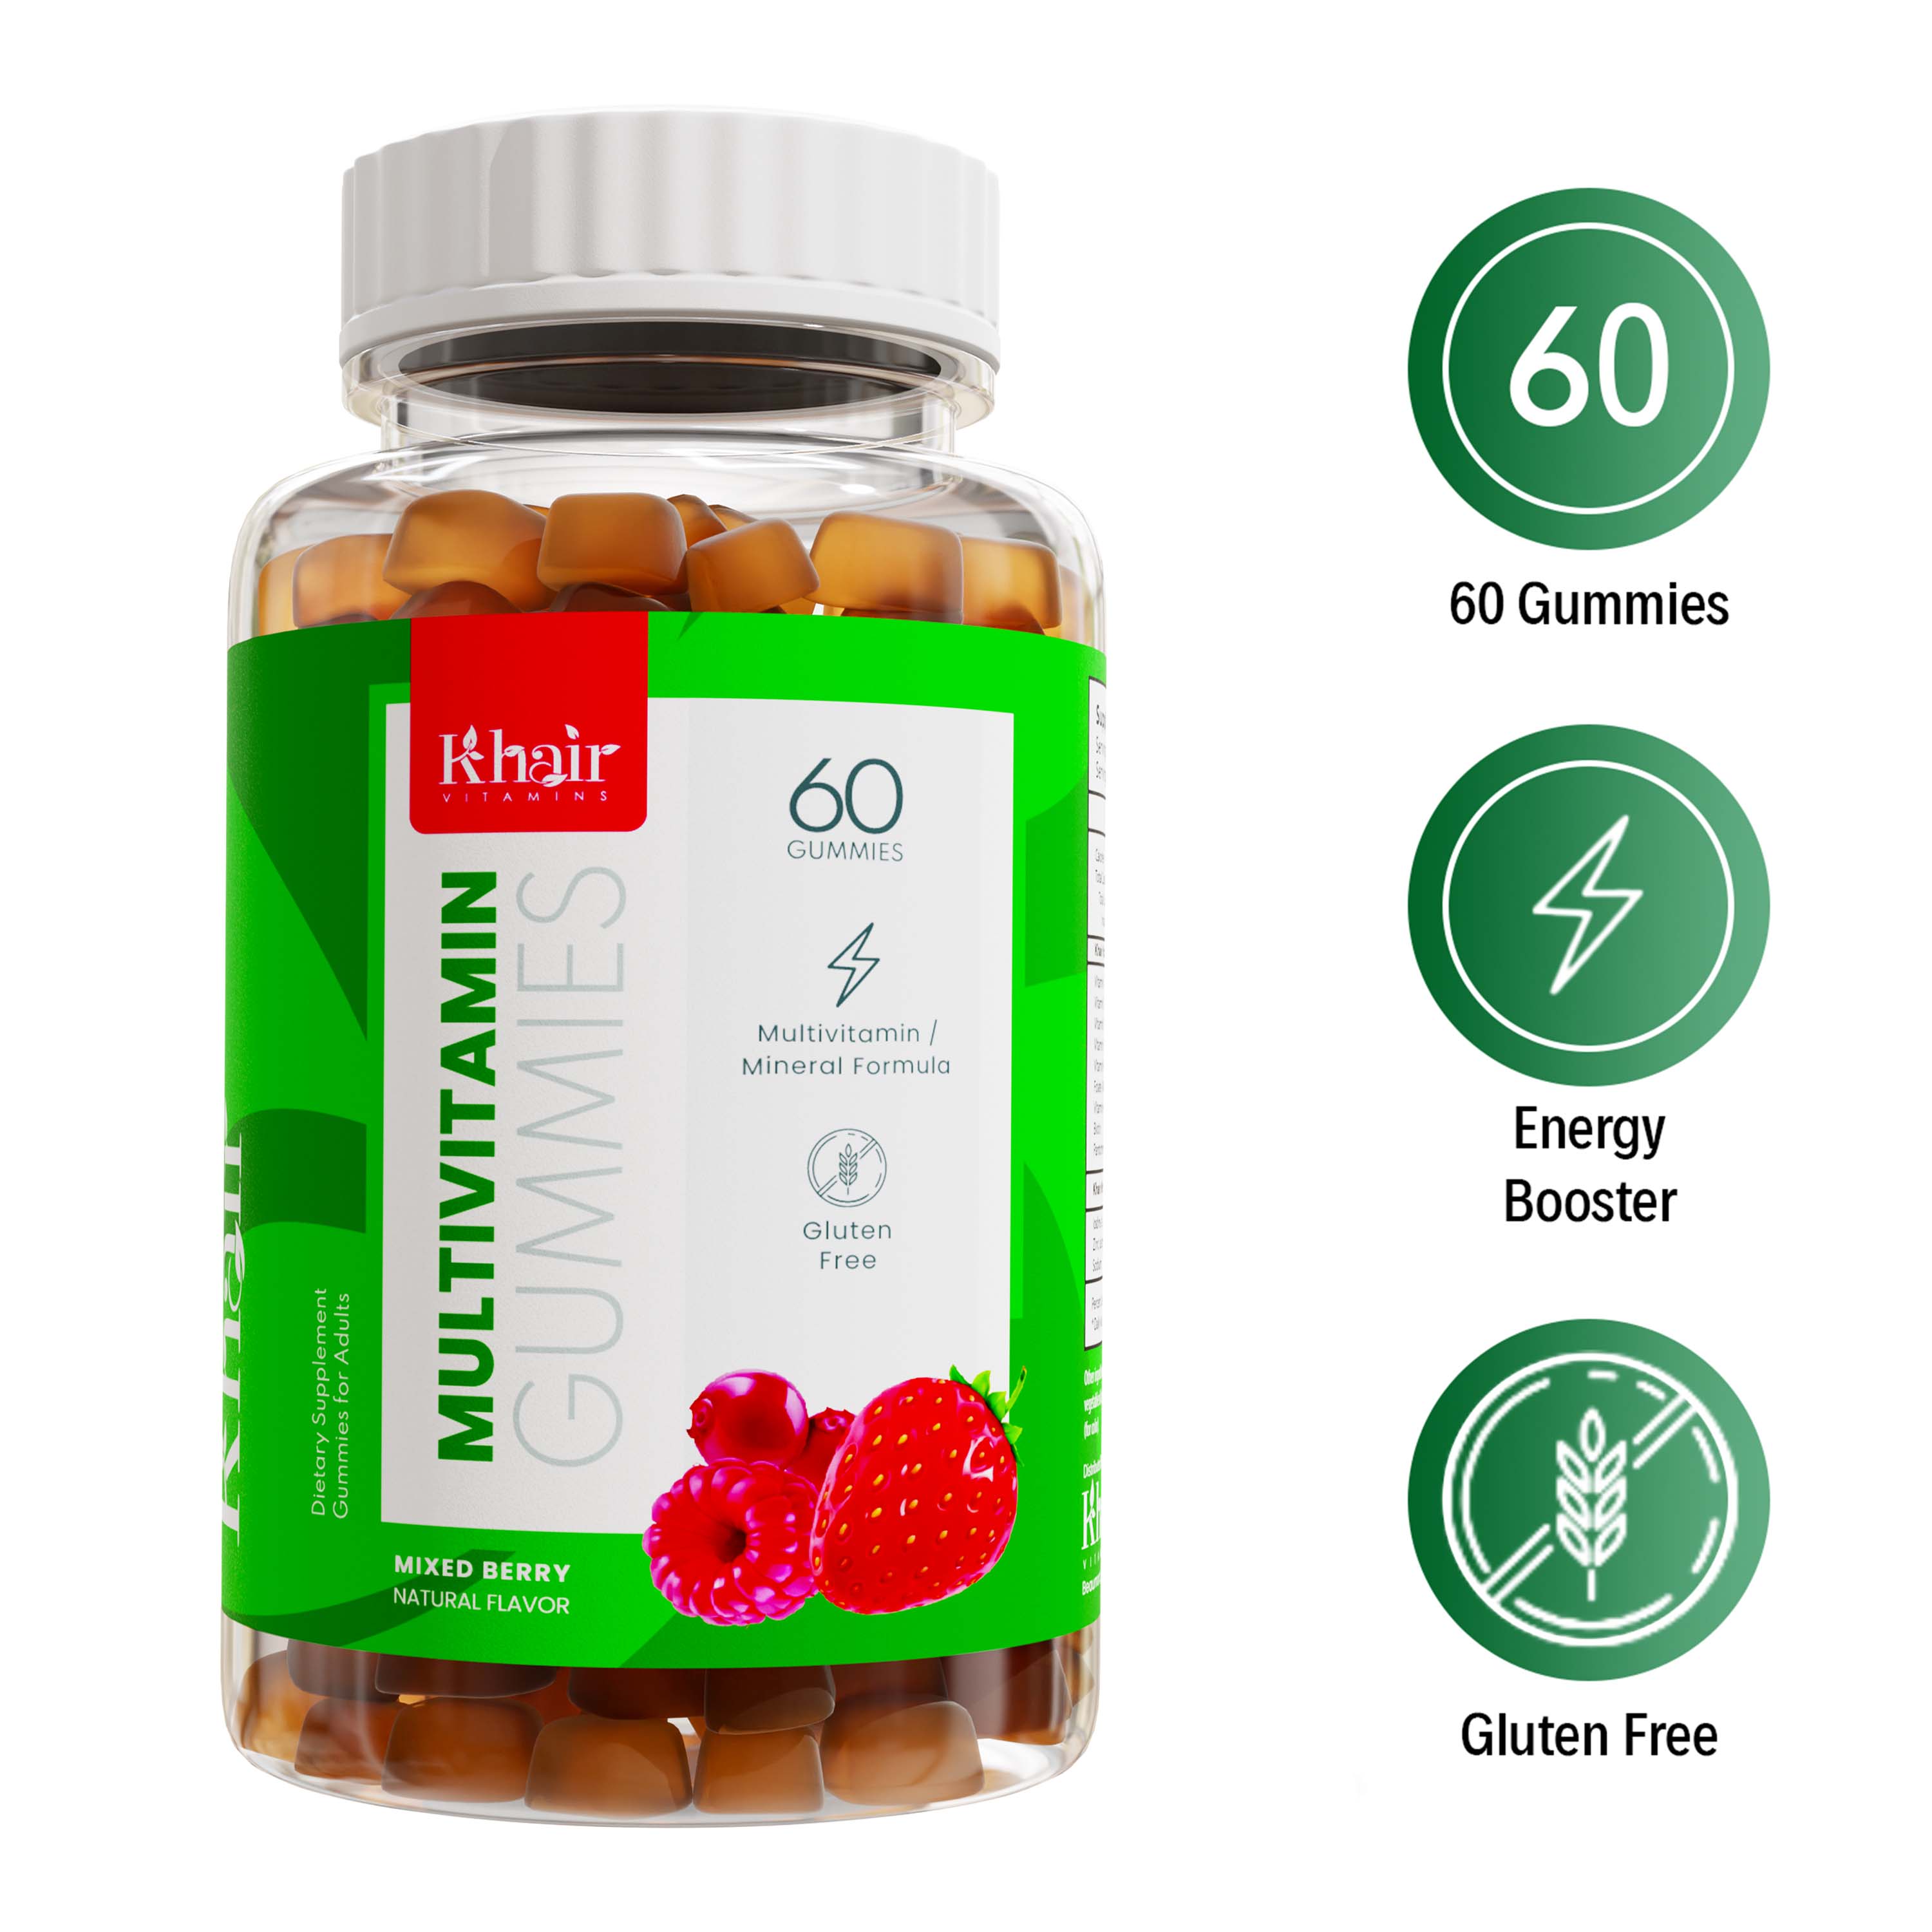 A bottle of Khair Multivitamin Gummies indicating a quantity of 60 gummies, with benefits highlighted as an Energy Booster and Gluten Free, in mixed berry natural flavor.